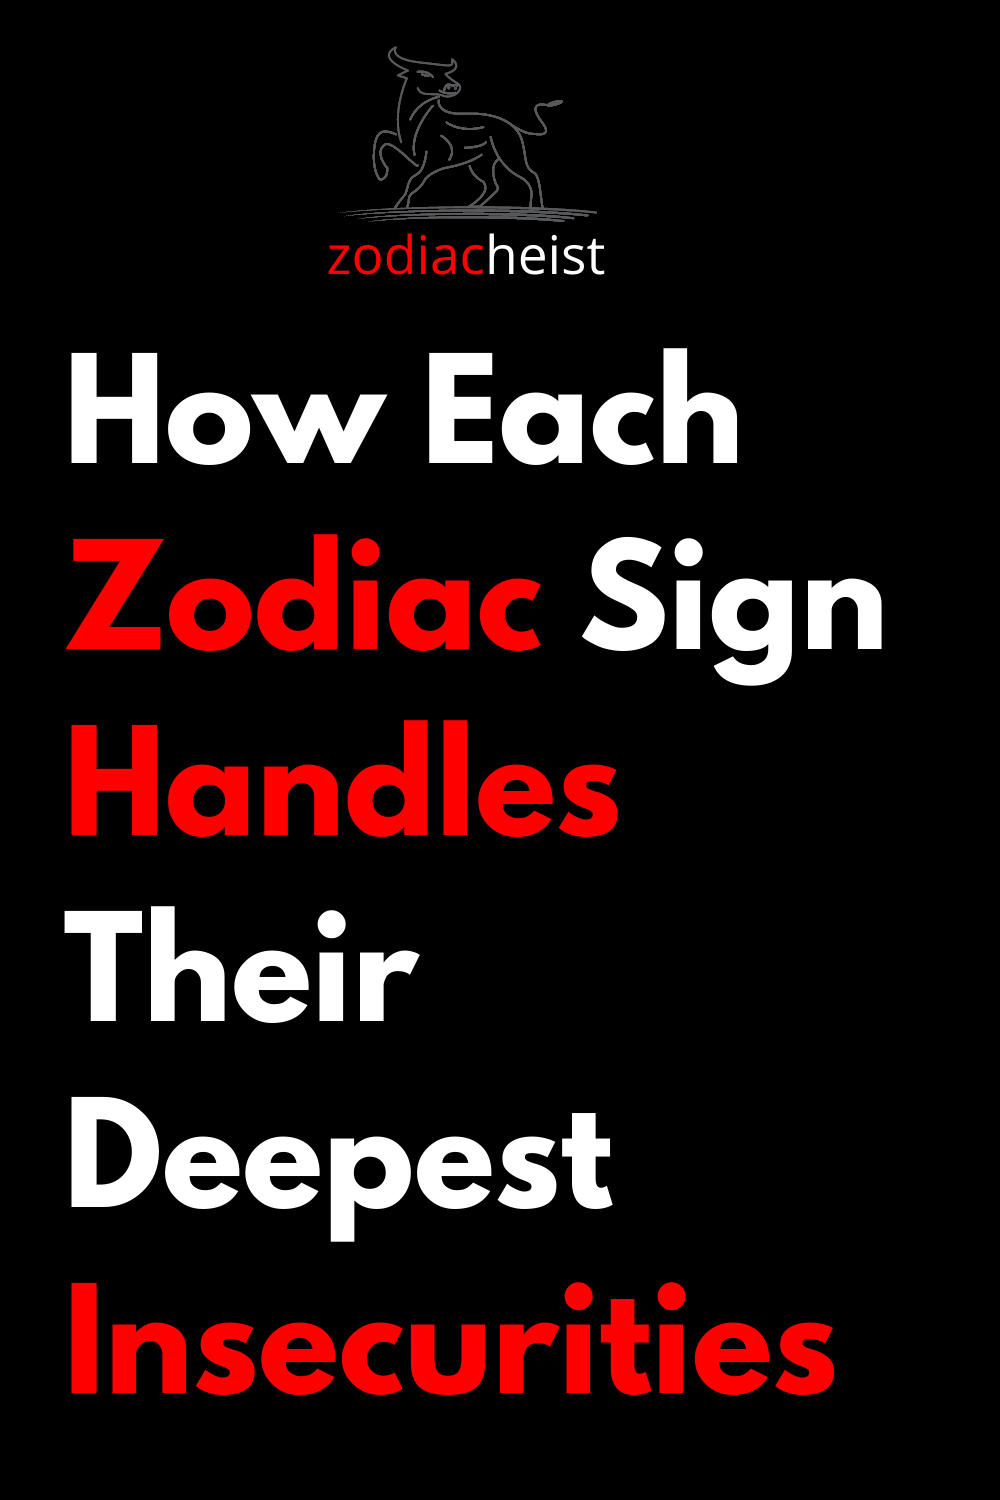 How Each Zodiac Sign Handles Their Deepest Insecurities